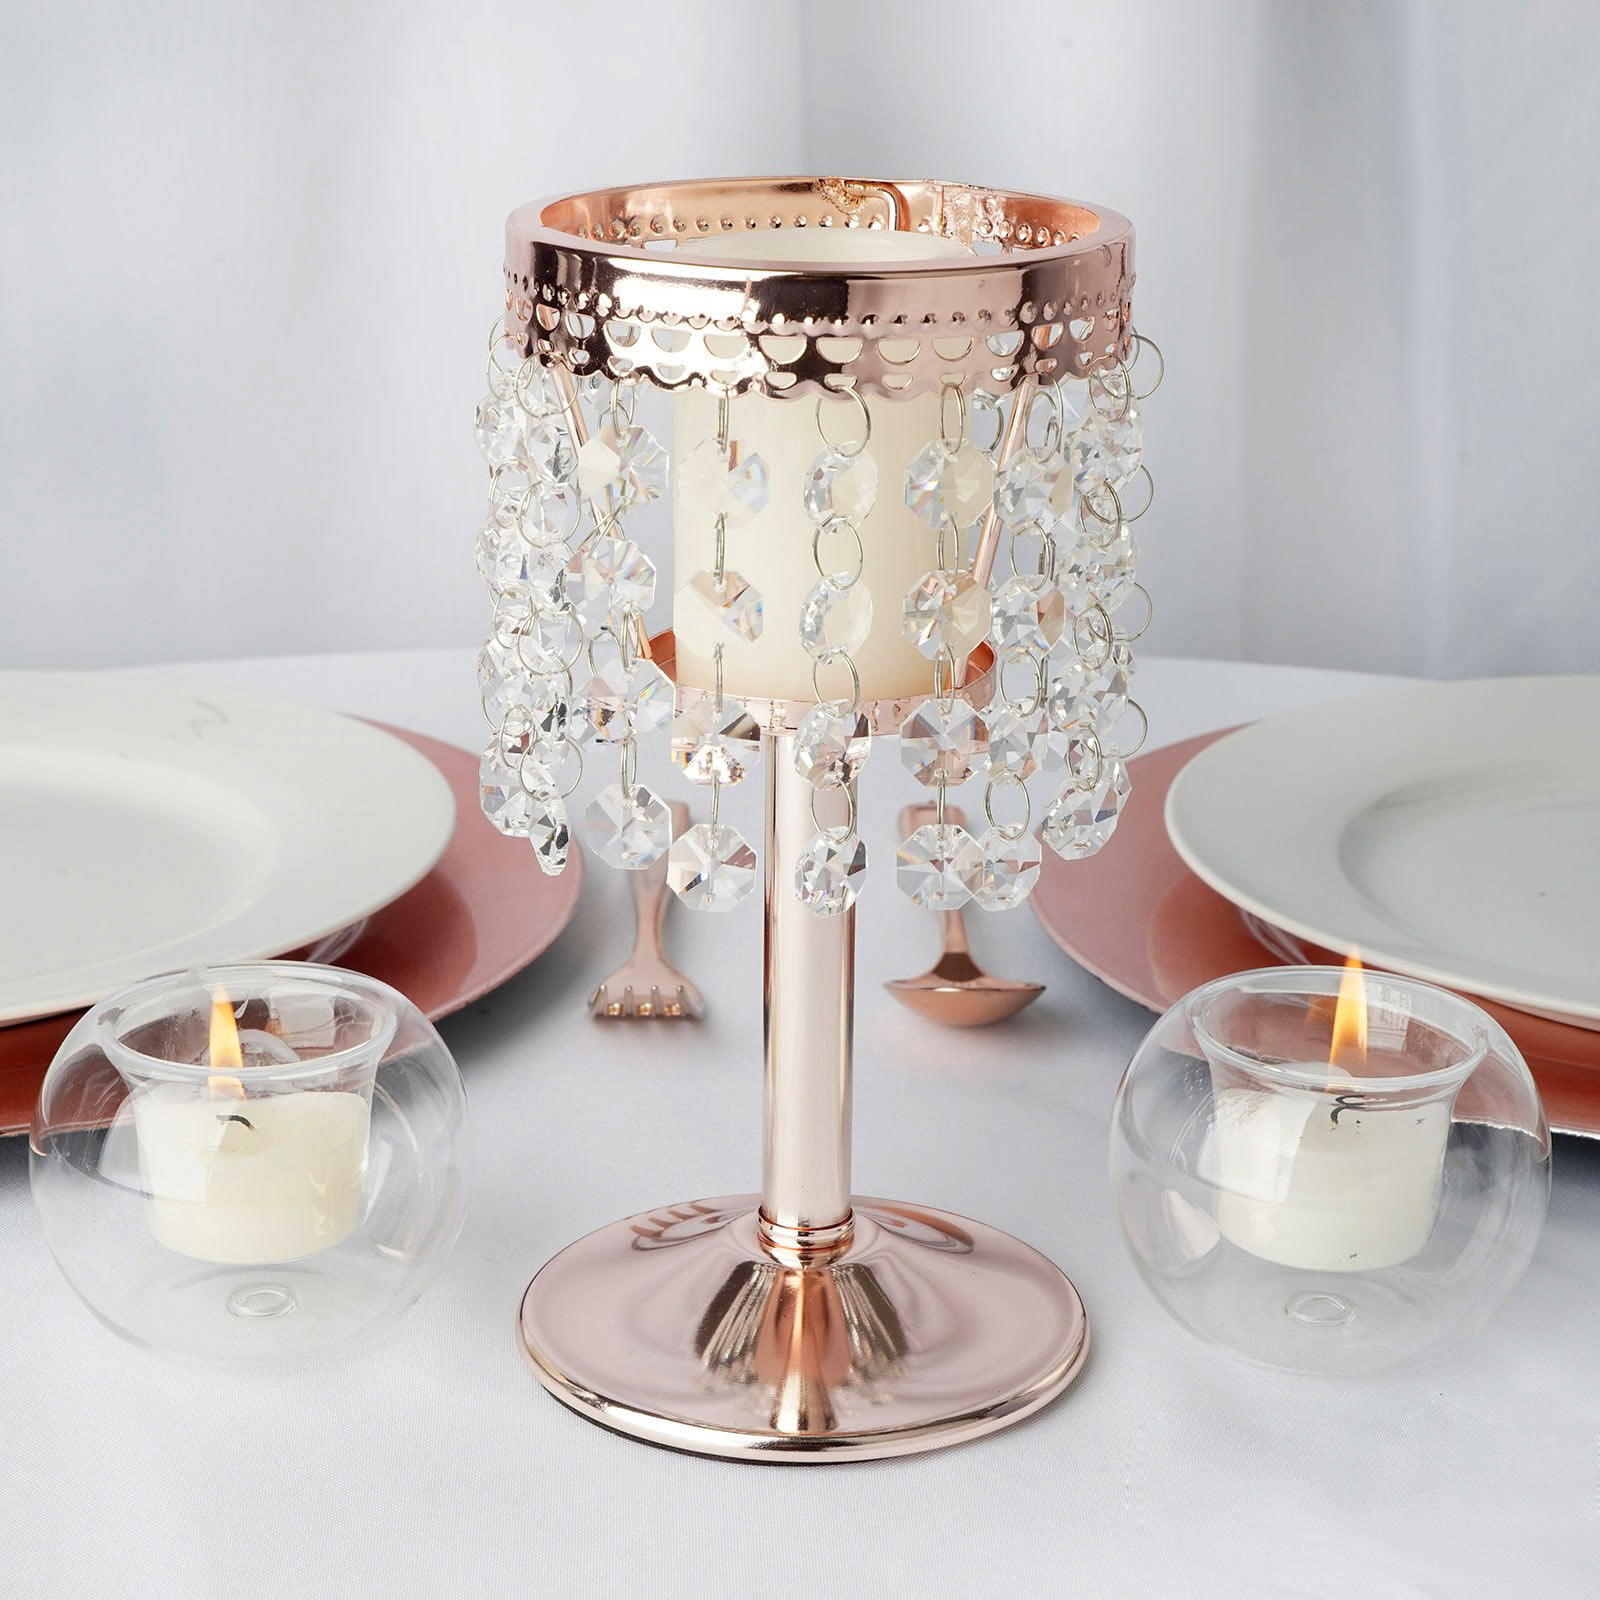 20 Rose Gold Candle Wedding Event Anniversary Tealight votive holder table decor 